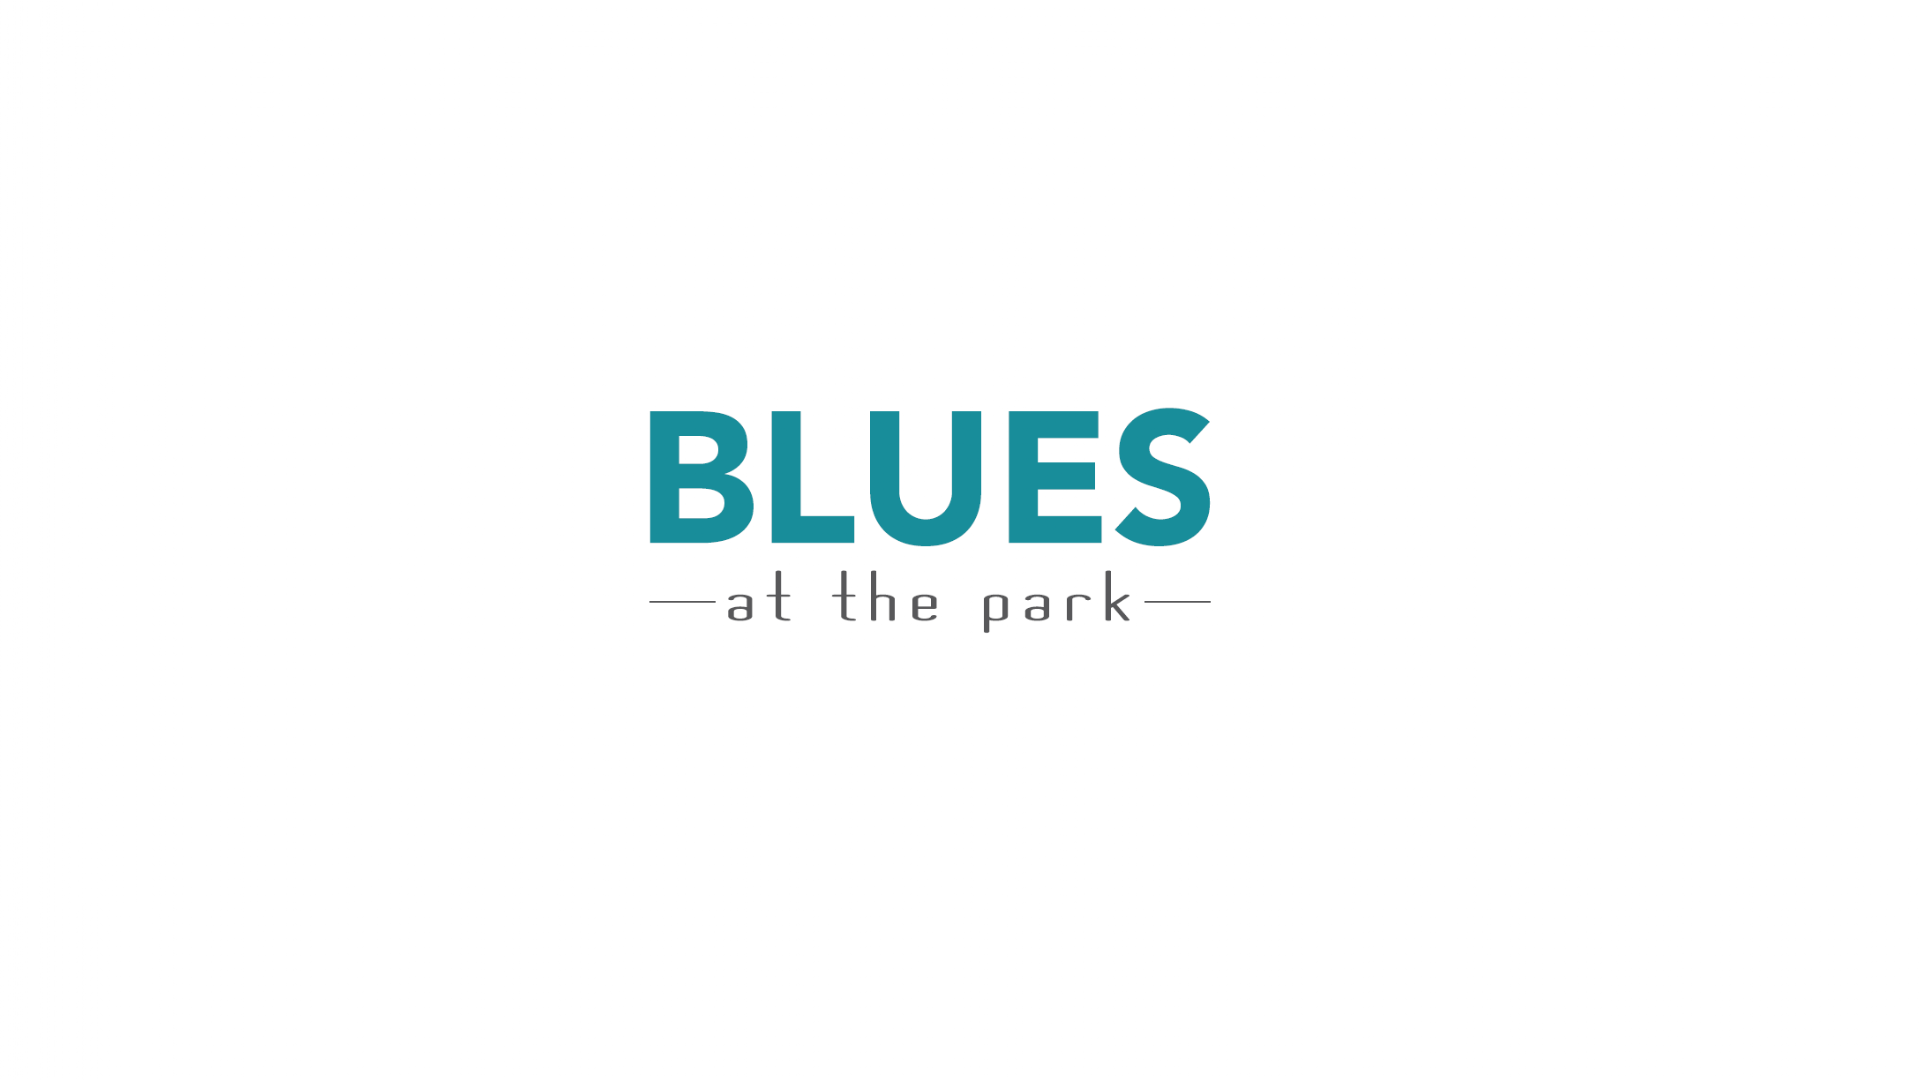 Blues - at the park - 25% Off Offer!